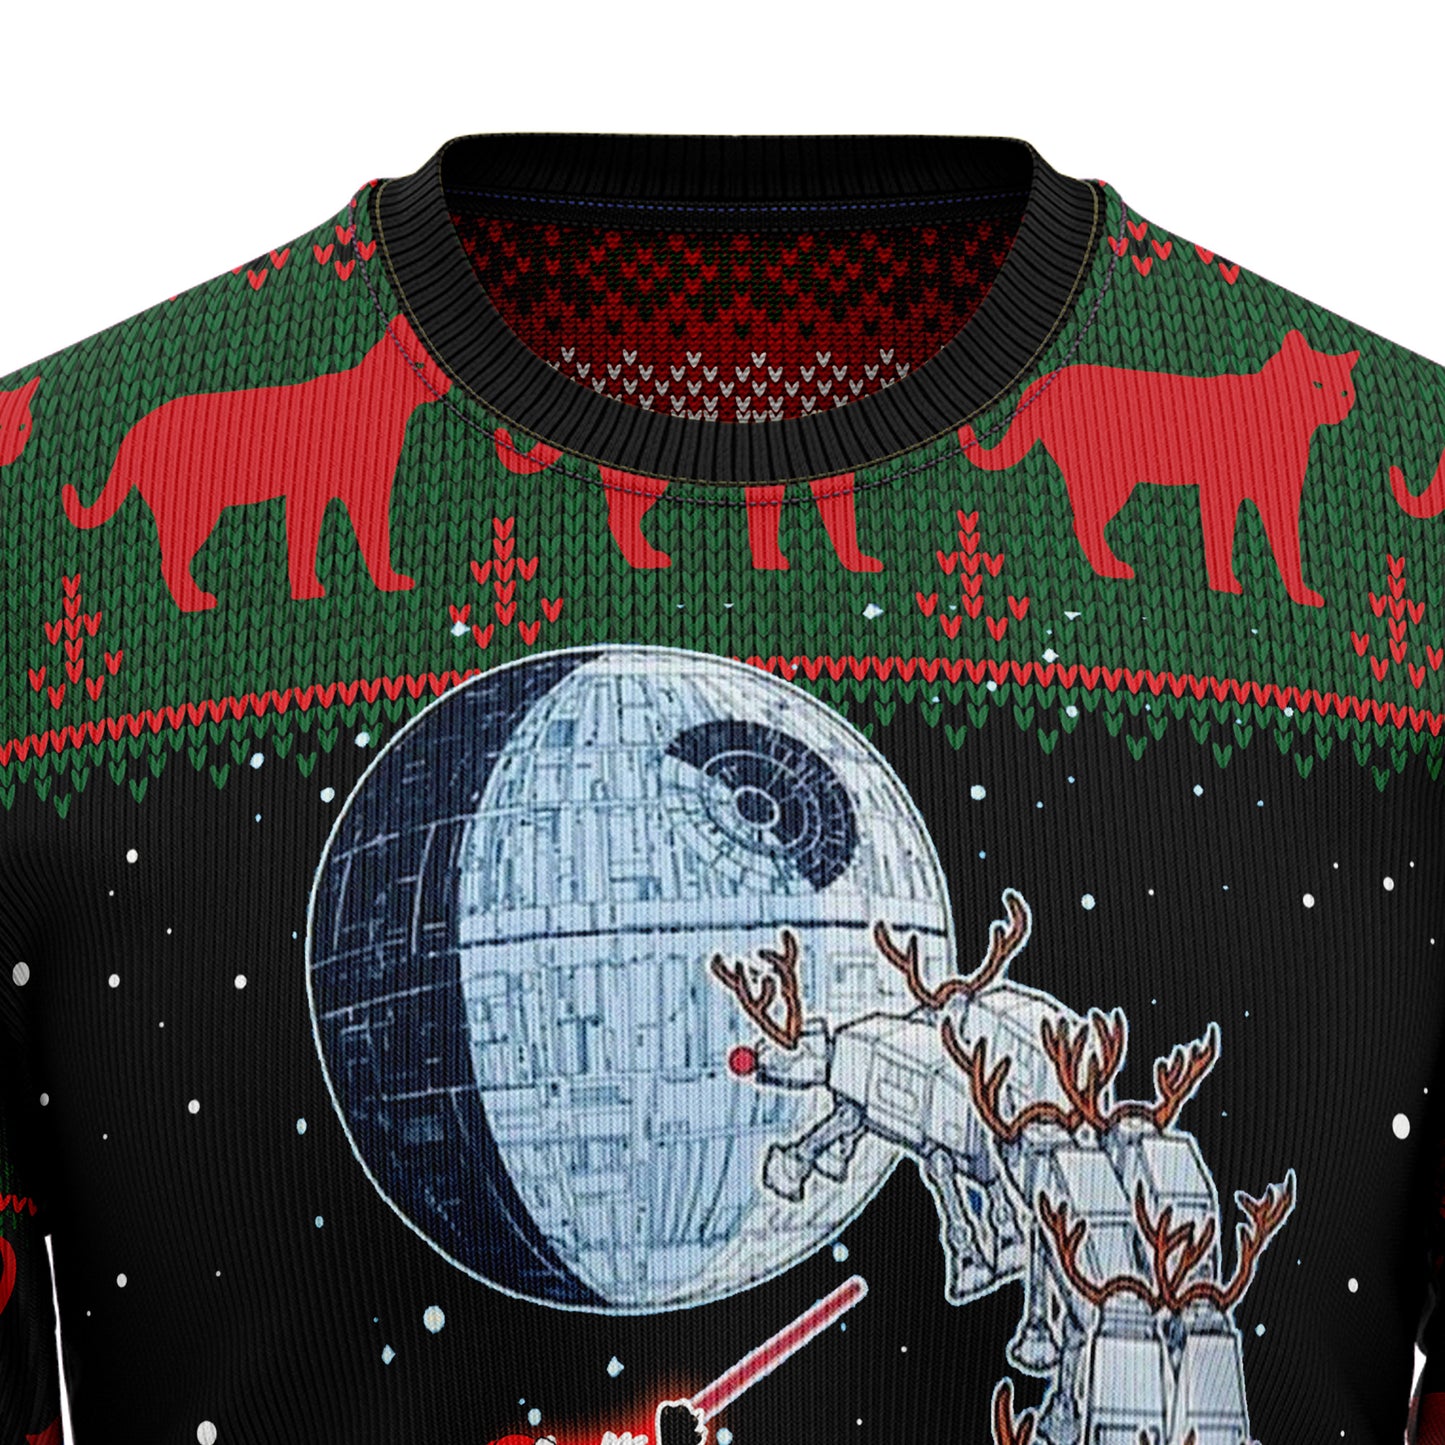 Black Cat Sleigh To Death Star HT100203 Ugly Christmas Sweater